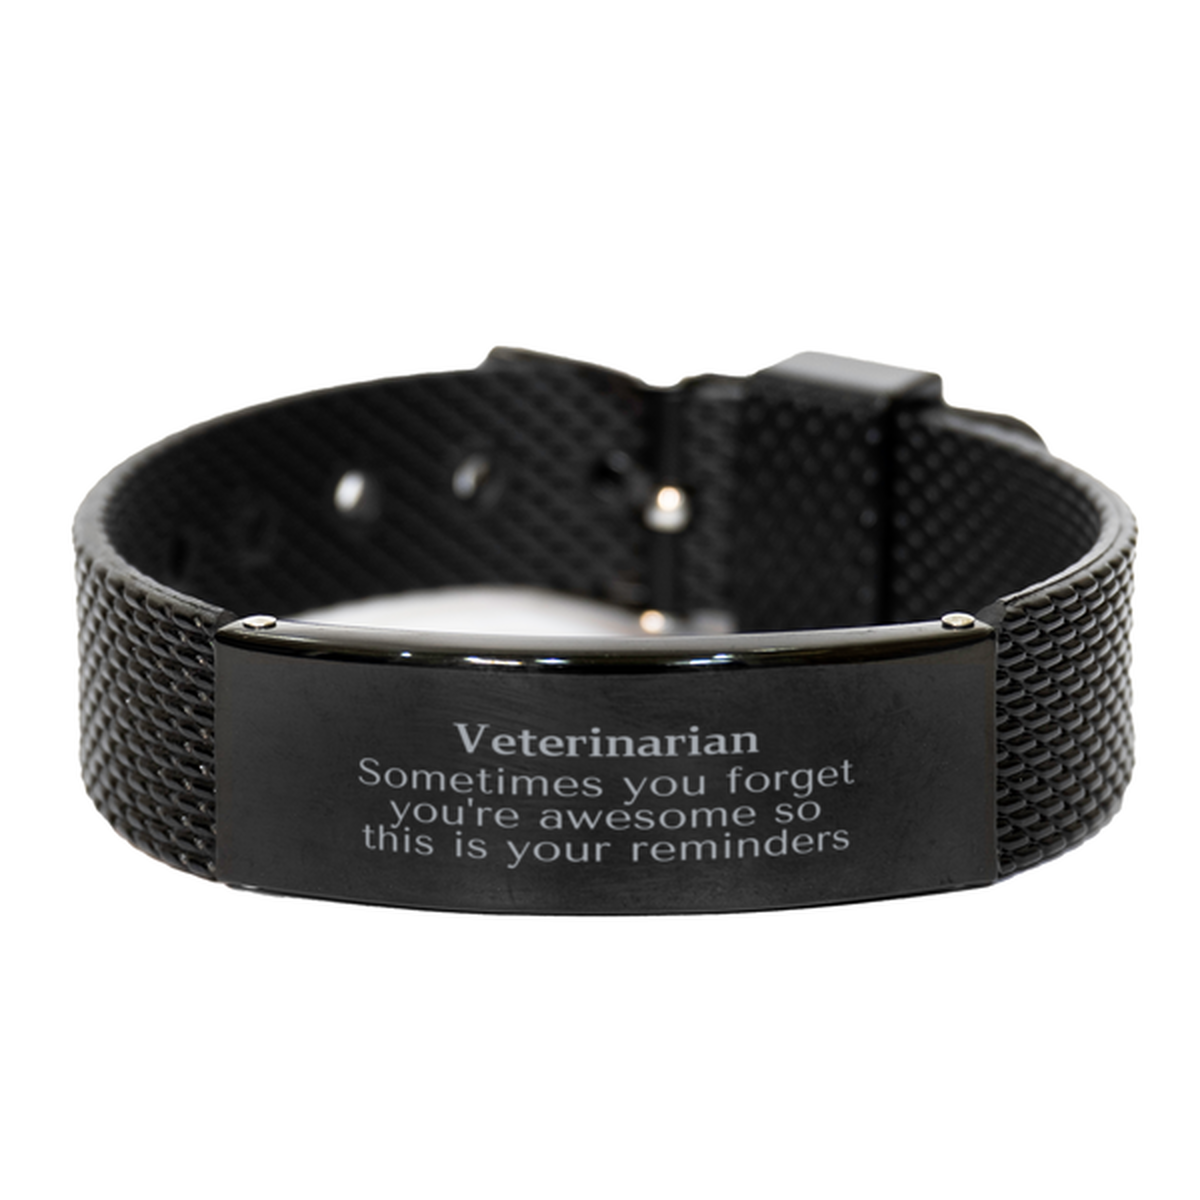 Sentimental Veterinarian Black Shark Mesh Bracelet, Veterinarian Sometimes you forget you're awesome so this is your reminders, Graduation Christmas Birthday Gifts for Veterinarian, Men, Women, Coworkers